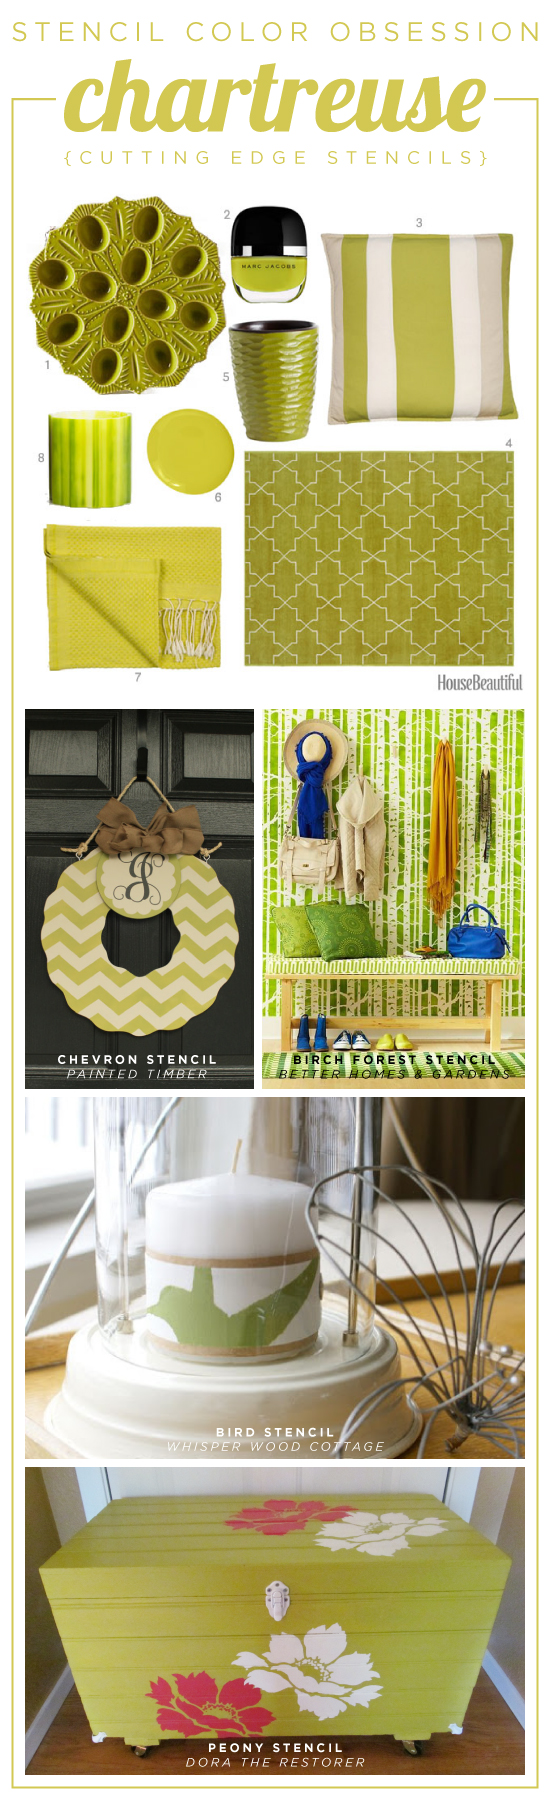 Cutting Edge Stencils shares chartreuse stenciled home decor and room ideas. http://www.cuttingedgestencils.com/wall-stencils-stencil-designs.html